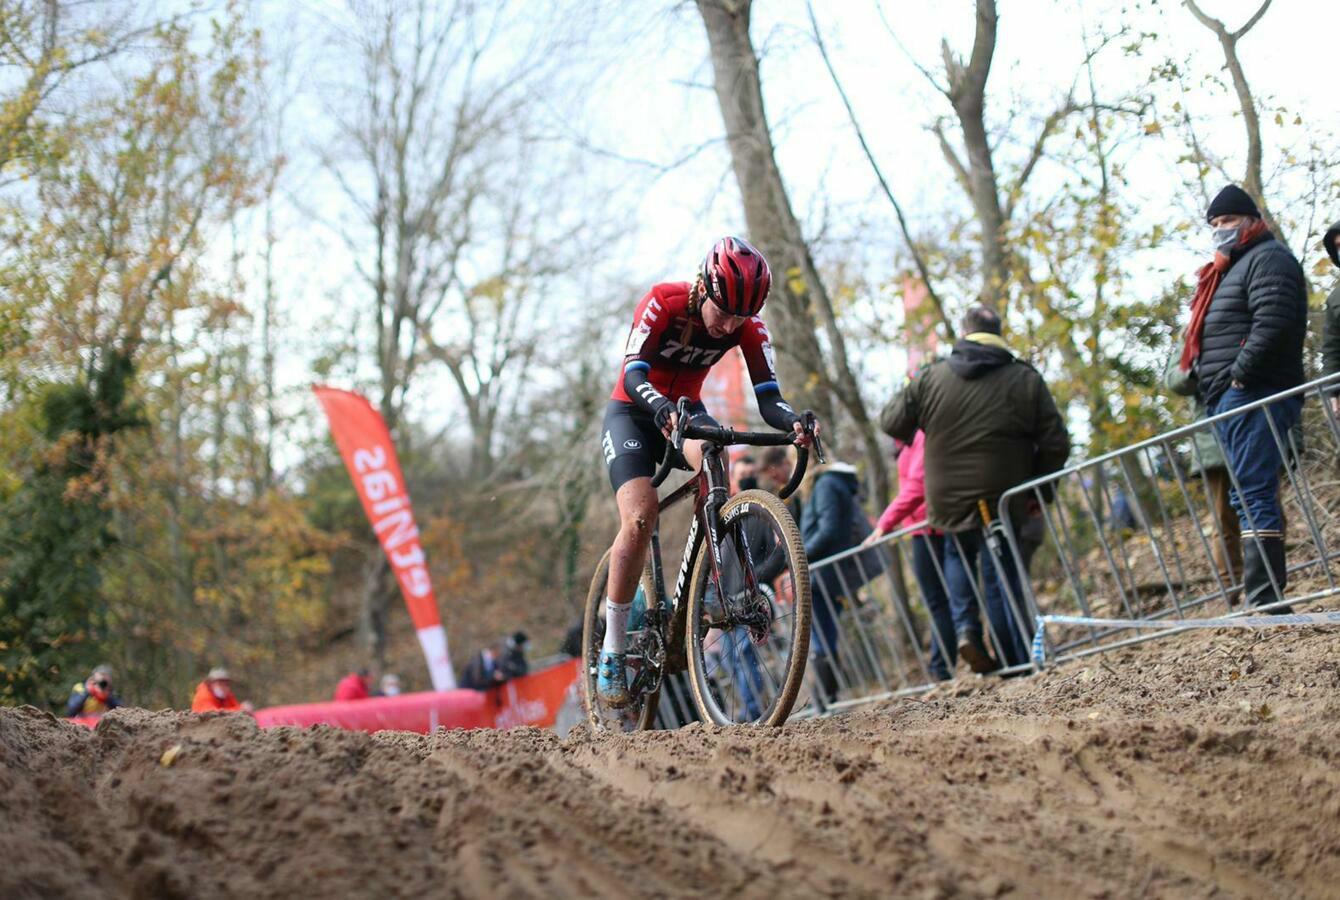 Worst soloes to first win of the season in Koksijde